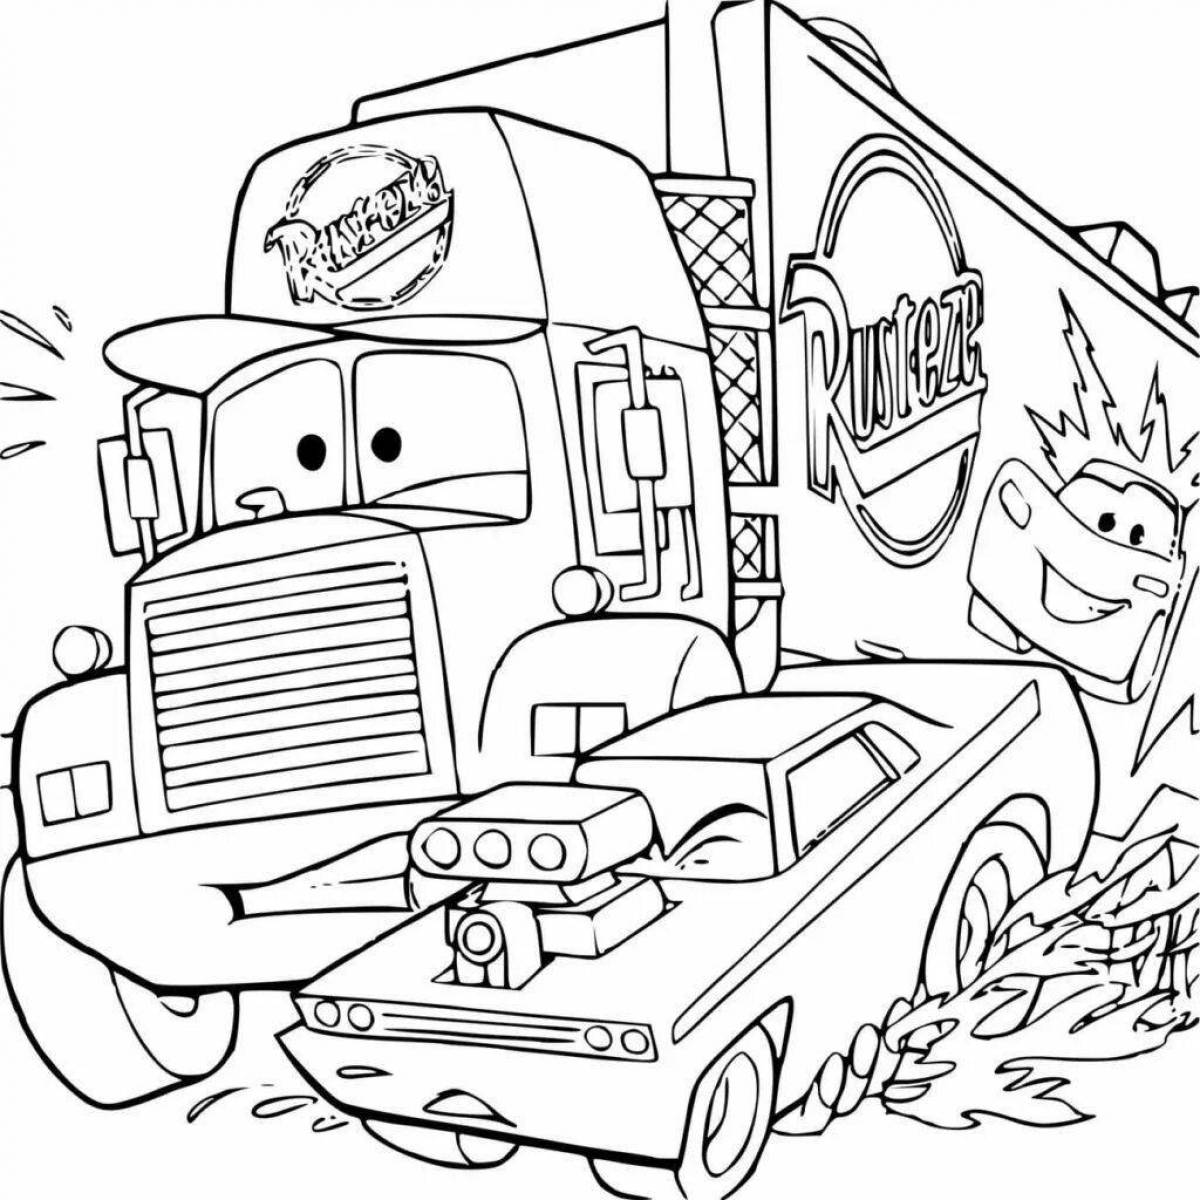 Terrible coloring book scary cars